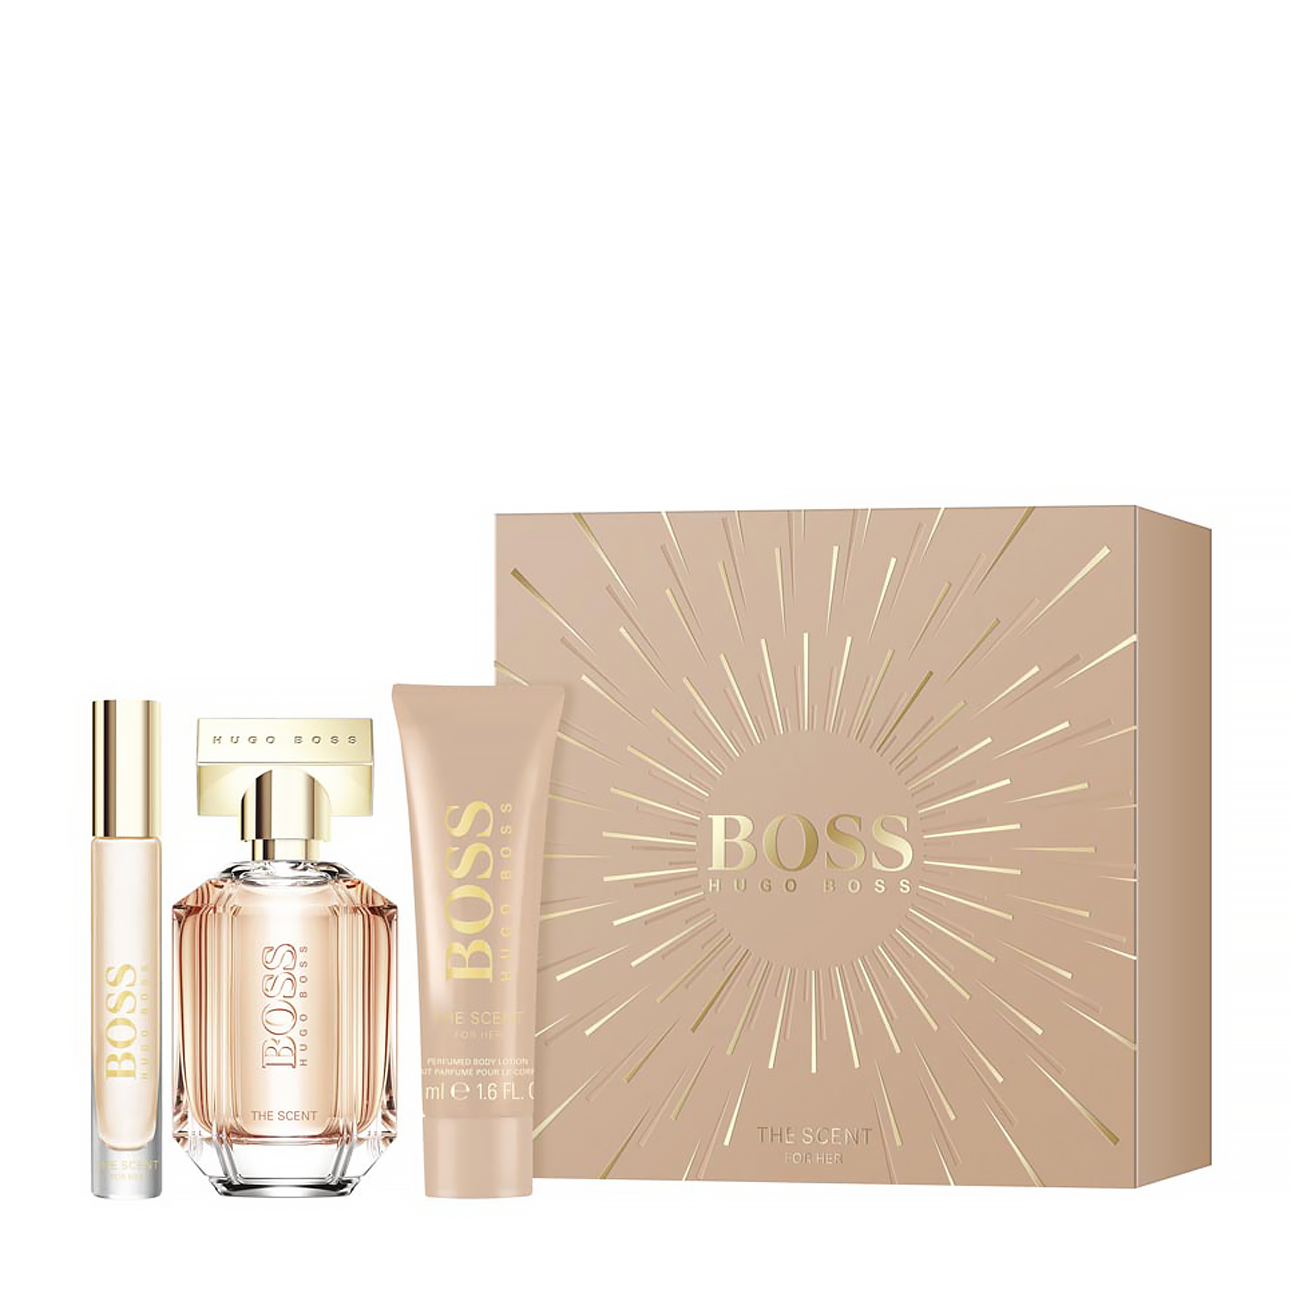 THE SCENT FOR HER SET 107ml poza